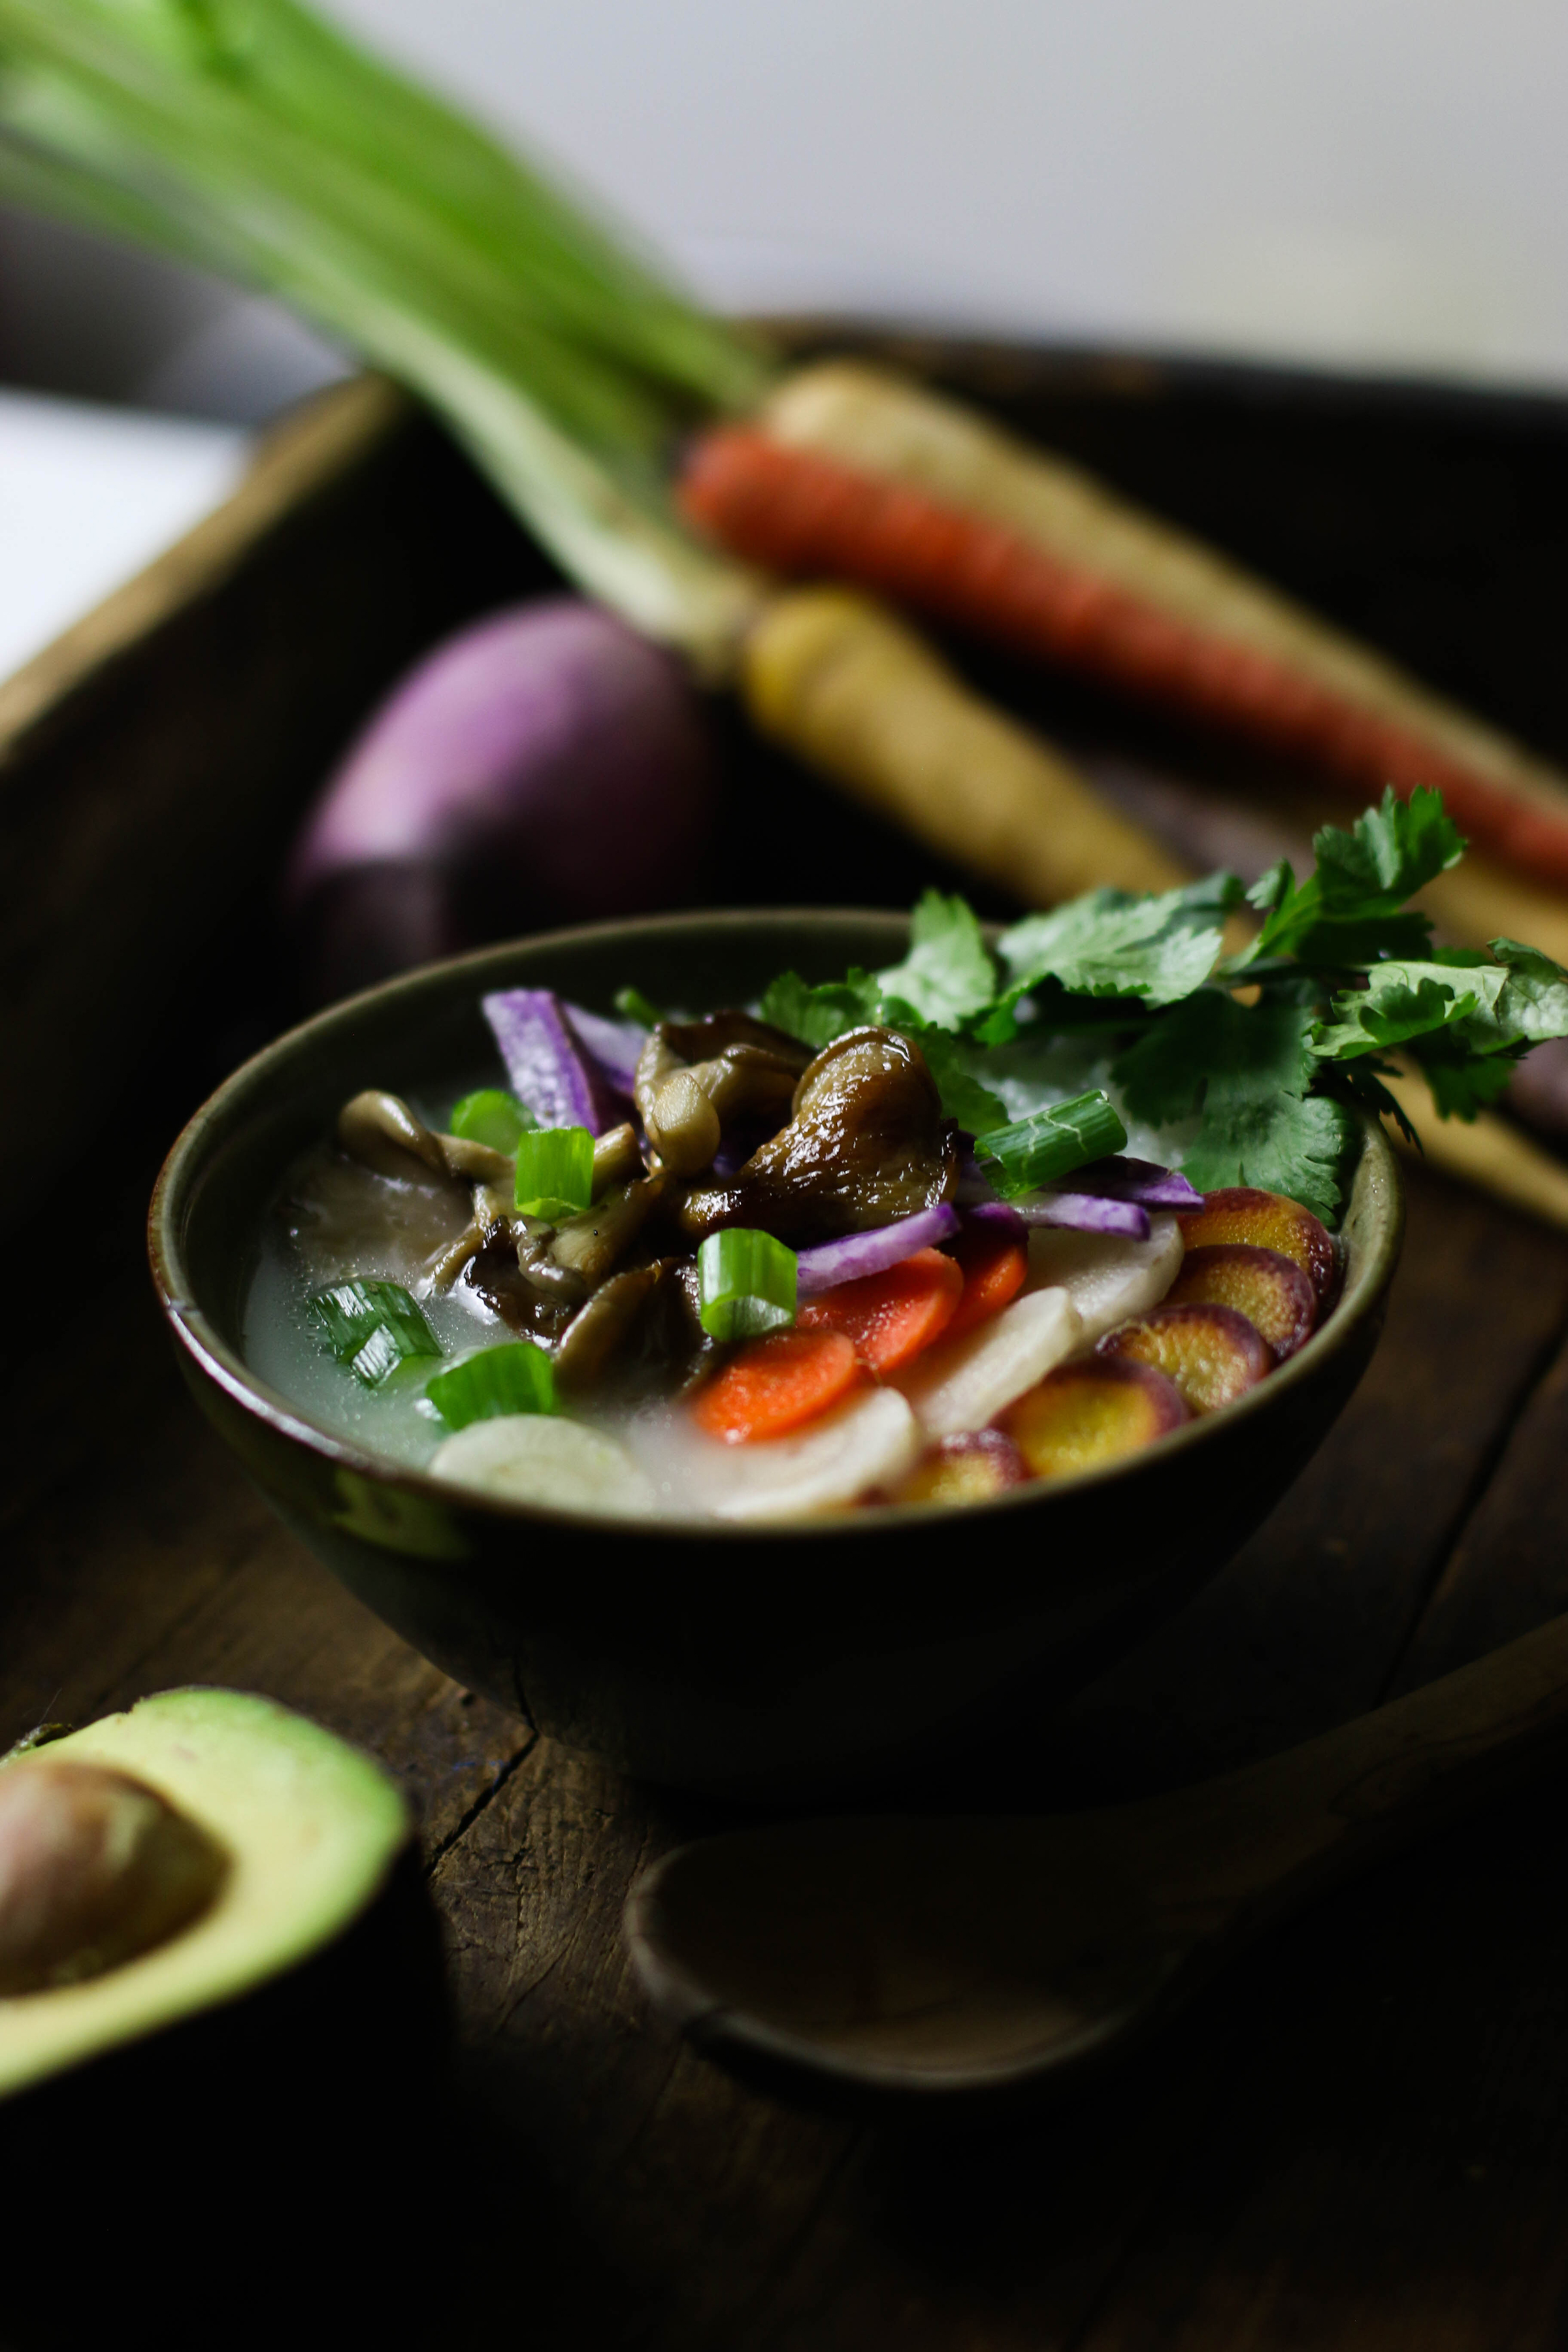 Bowl of congee with vegetables and herbs on top surrounded by an avocado and carrots